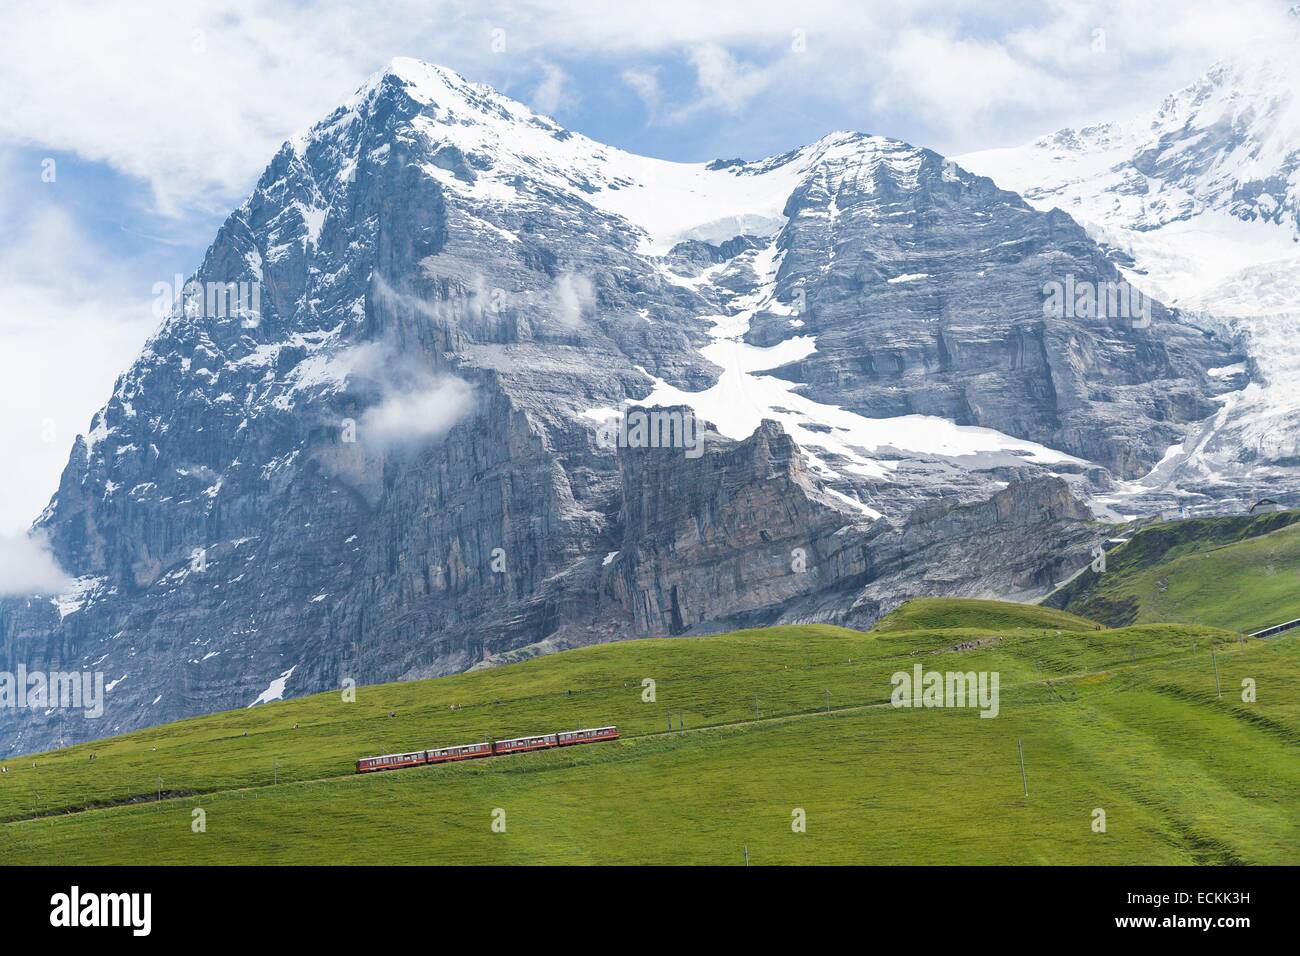 Switzerland, canton of Bern, Grindelwald, listed as World Heritage by UNESCO, train to Jungfraujoch, the highest railway station in Europe and the north face of the Eiger peak Stock Photo